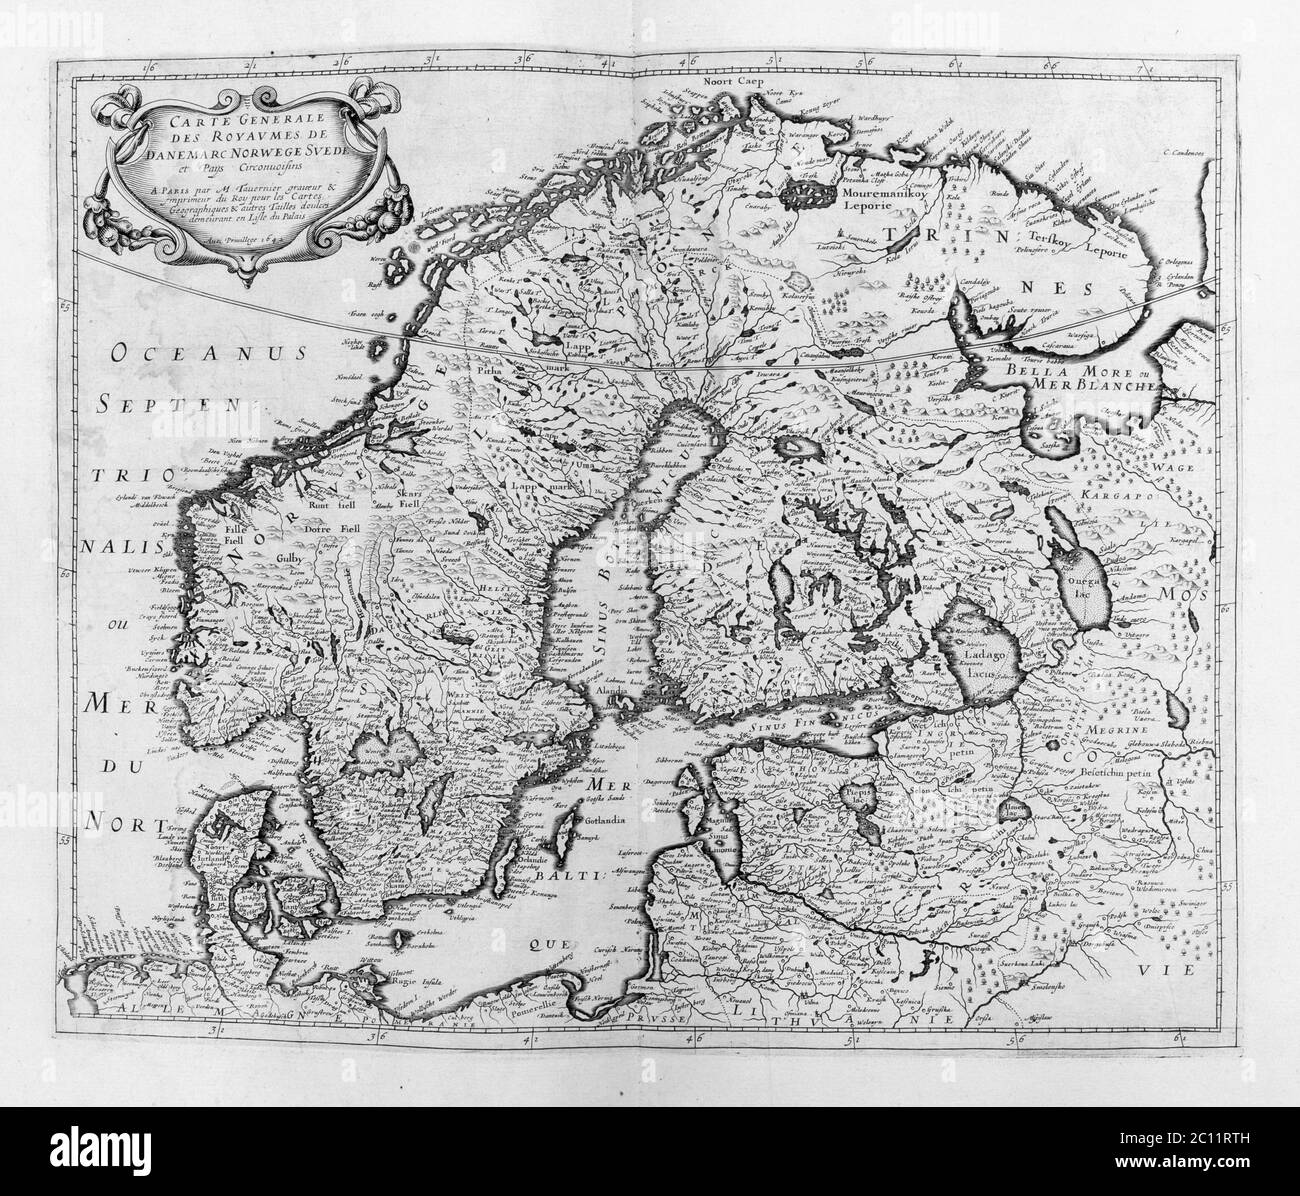 Old map of  Scandinavia and Northen Europe - From an 1656 Atlas of Geography from P. du Val - France (Private collection) Stock Photo